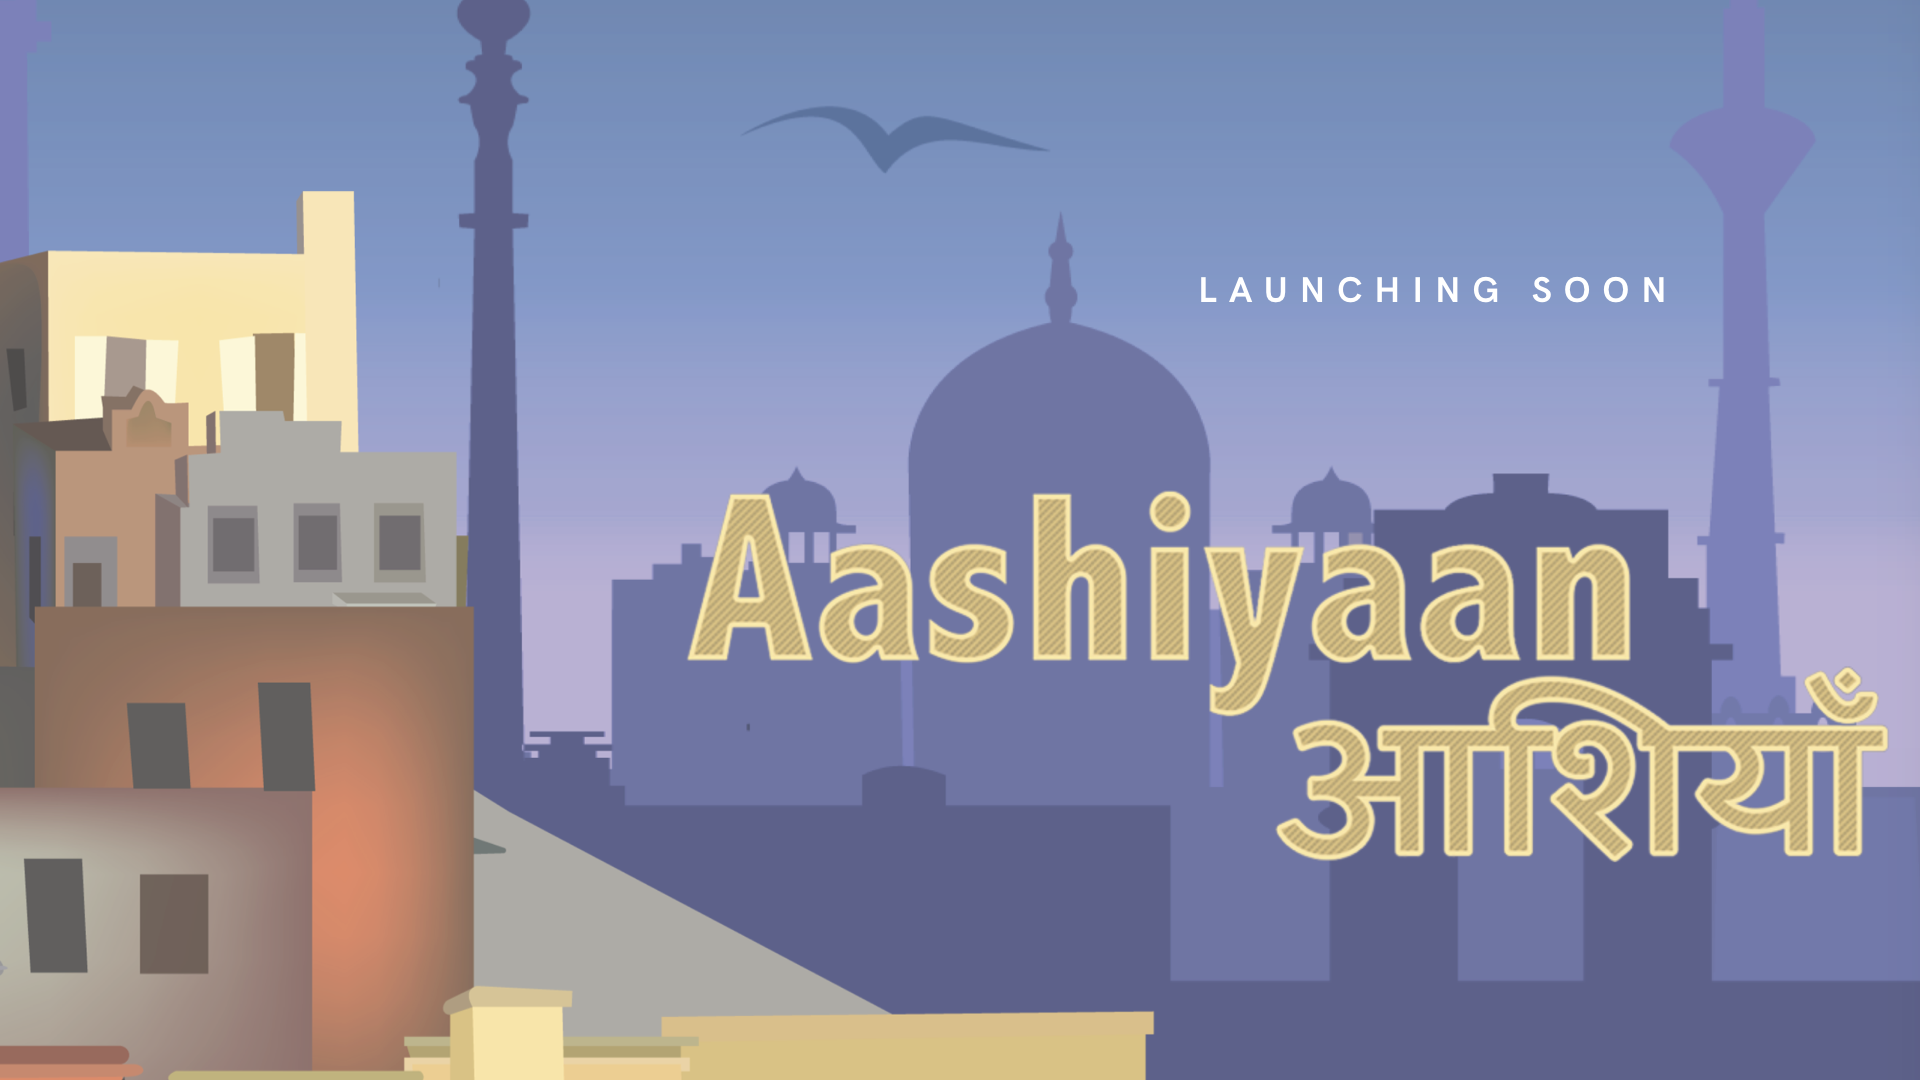 aashiyaan city illustration with the text 'launching soon'